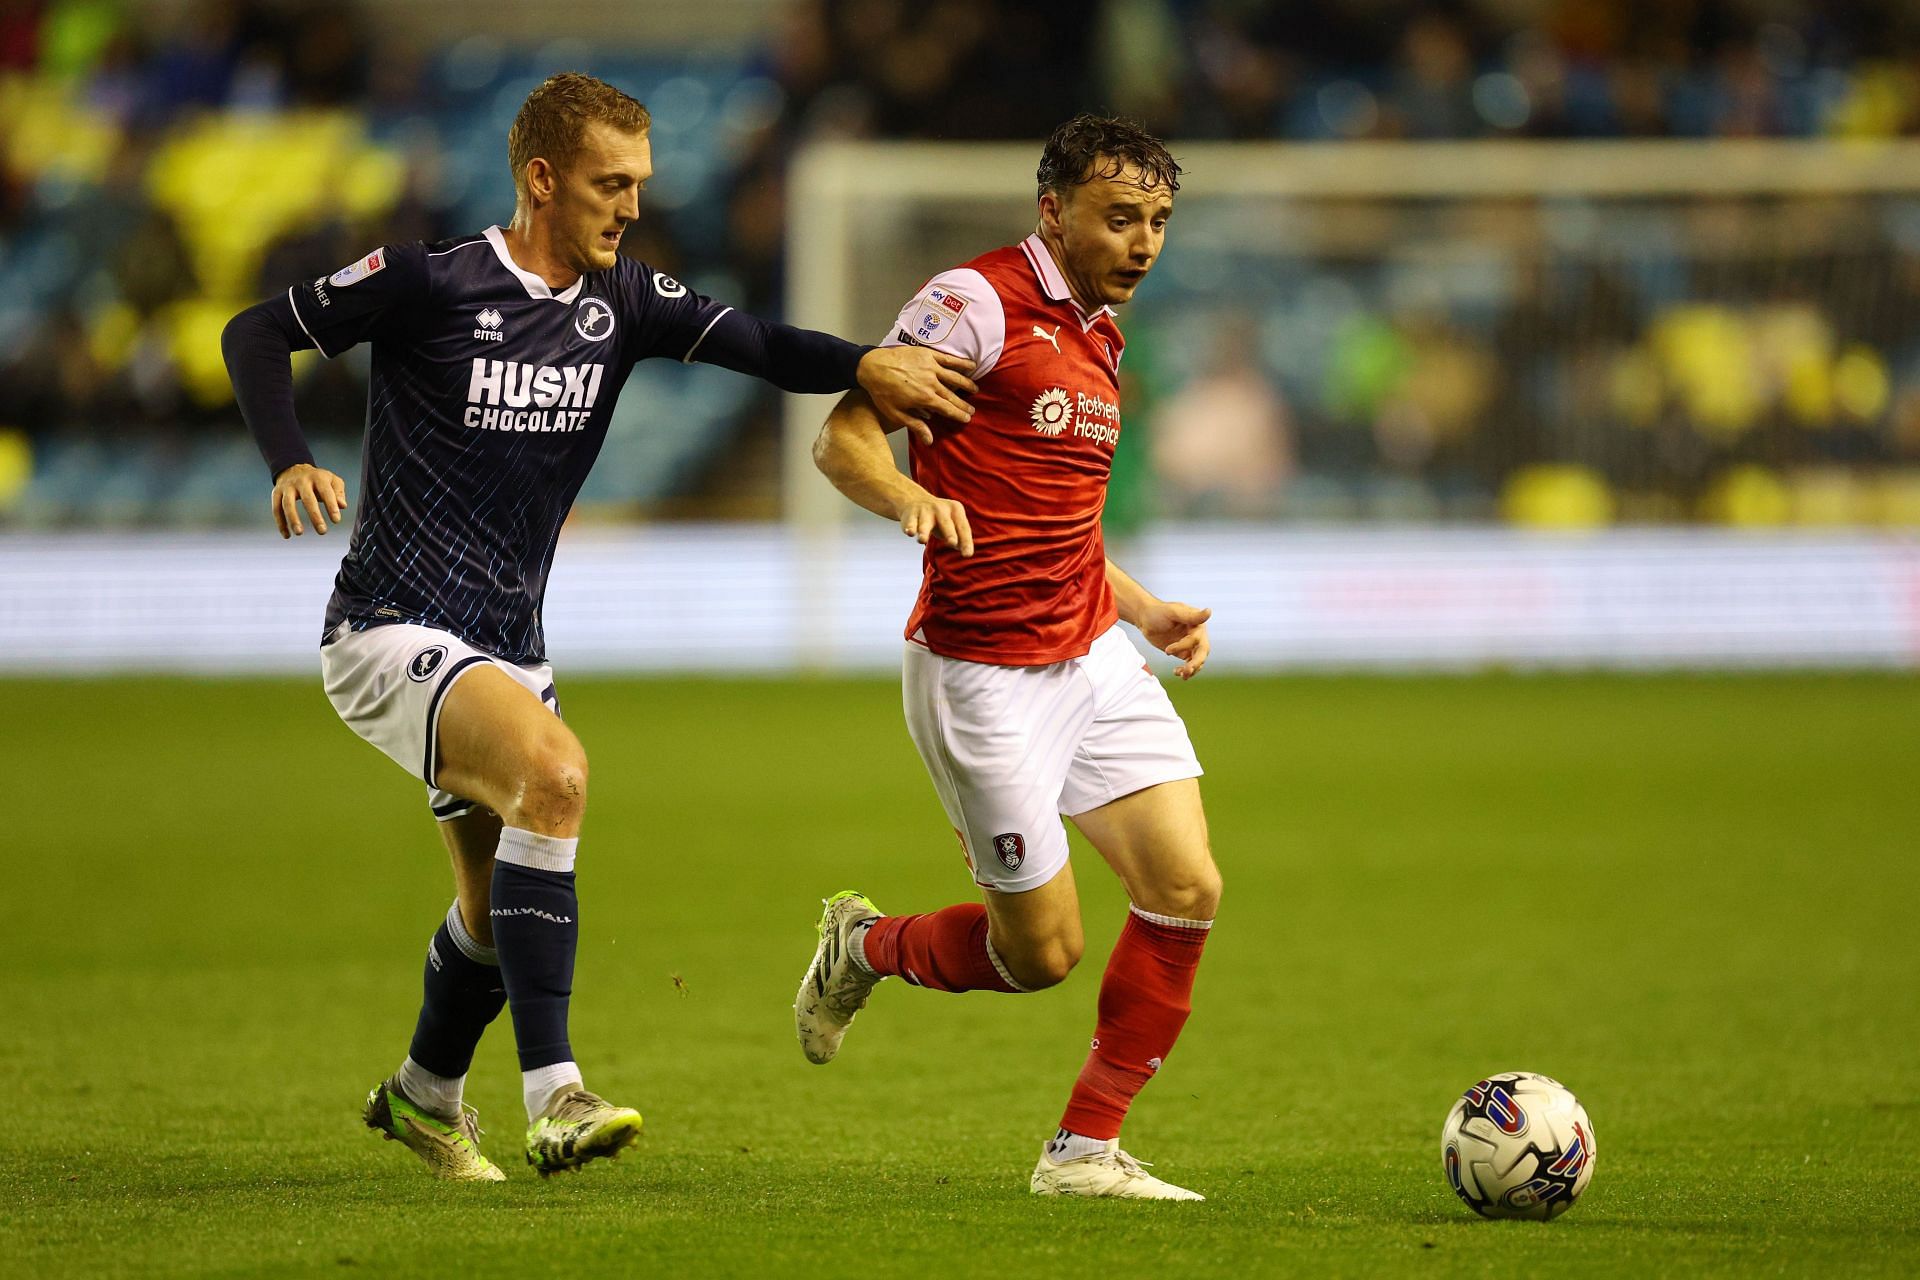 Millwall v Rotherham United - Match Preview